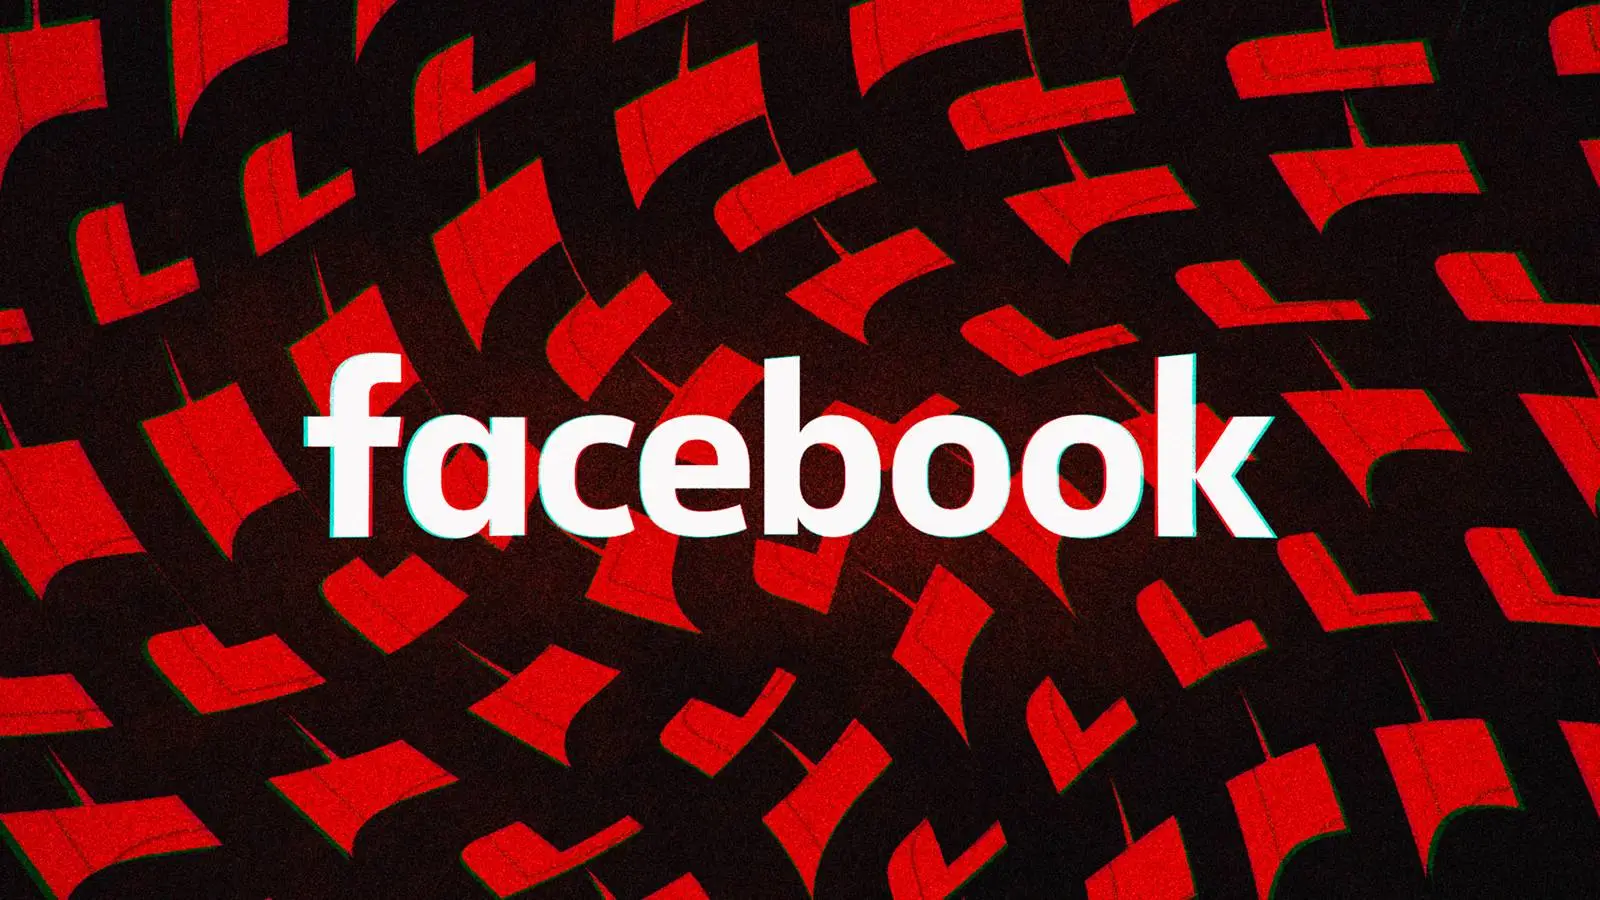 Facebook has updated its Application again, what changes are coming to Phones, Tablets